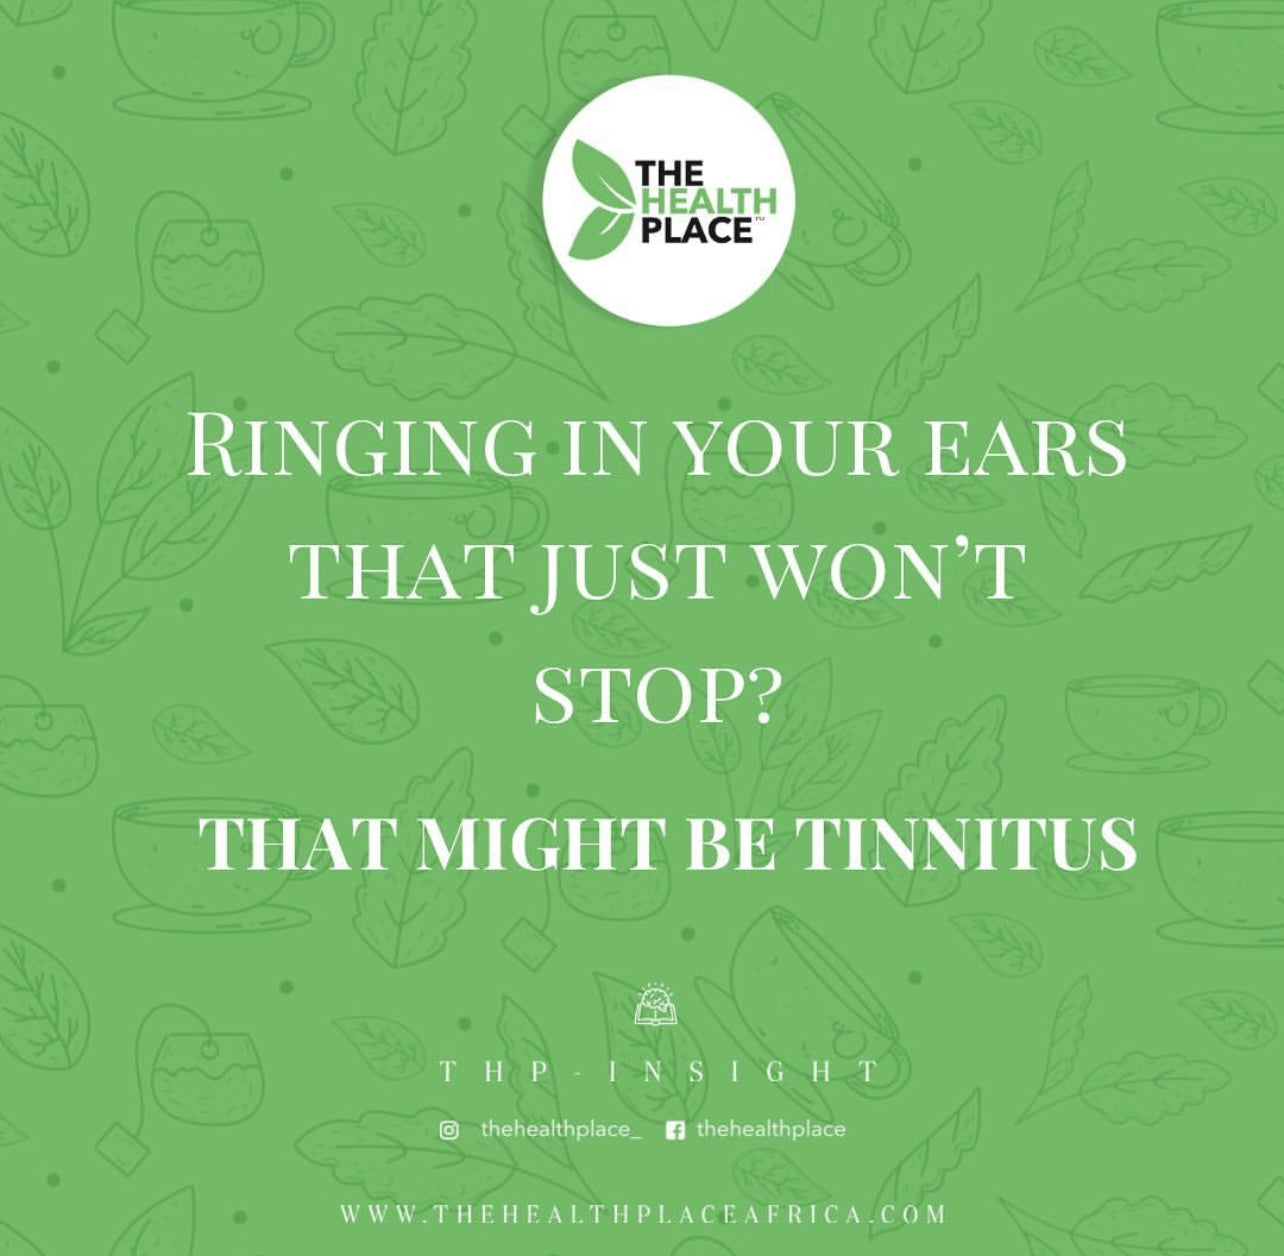 RINGING IN THE EARS THAT JUST WON'T STOP? THAT MIGHT BE TINNITUS